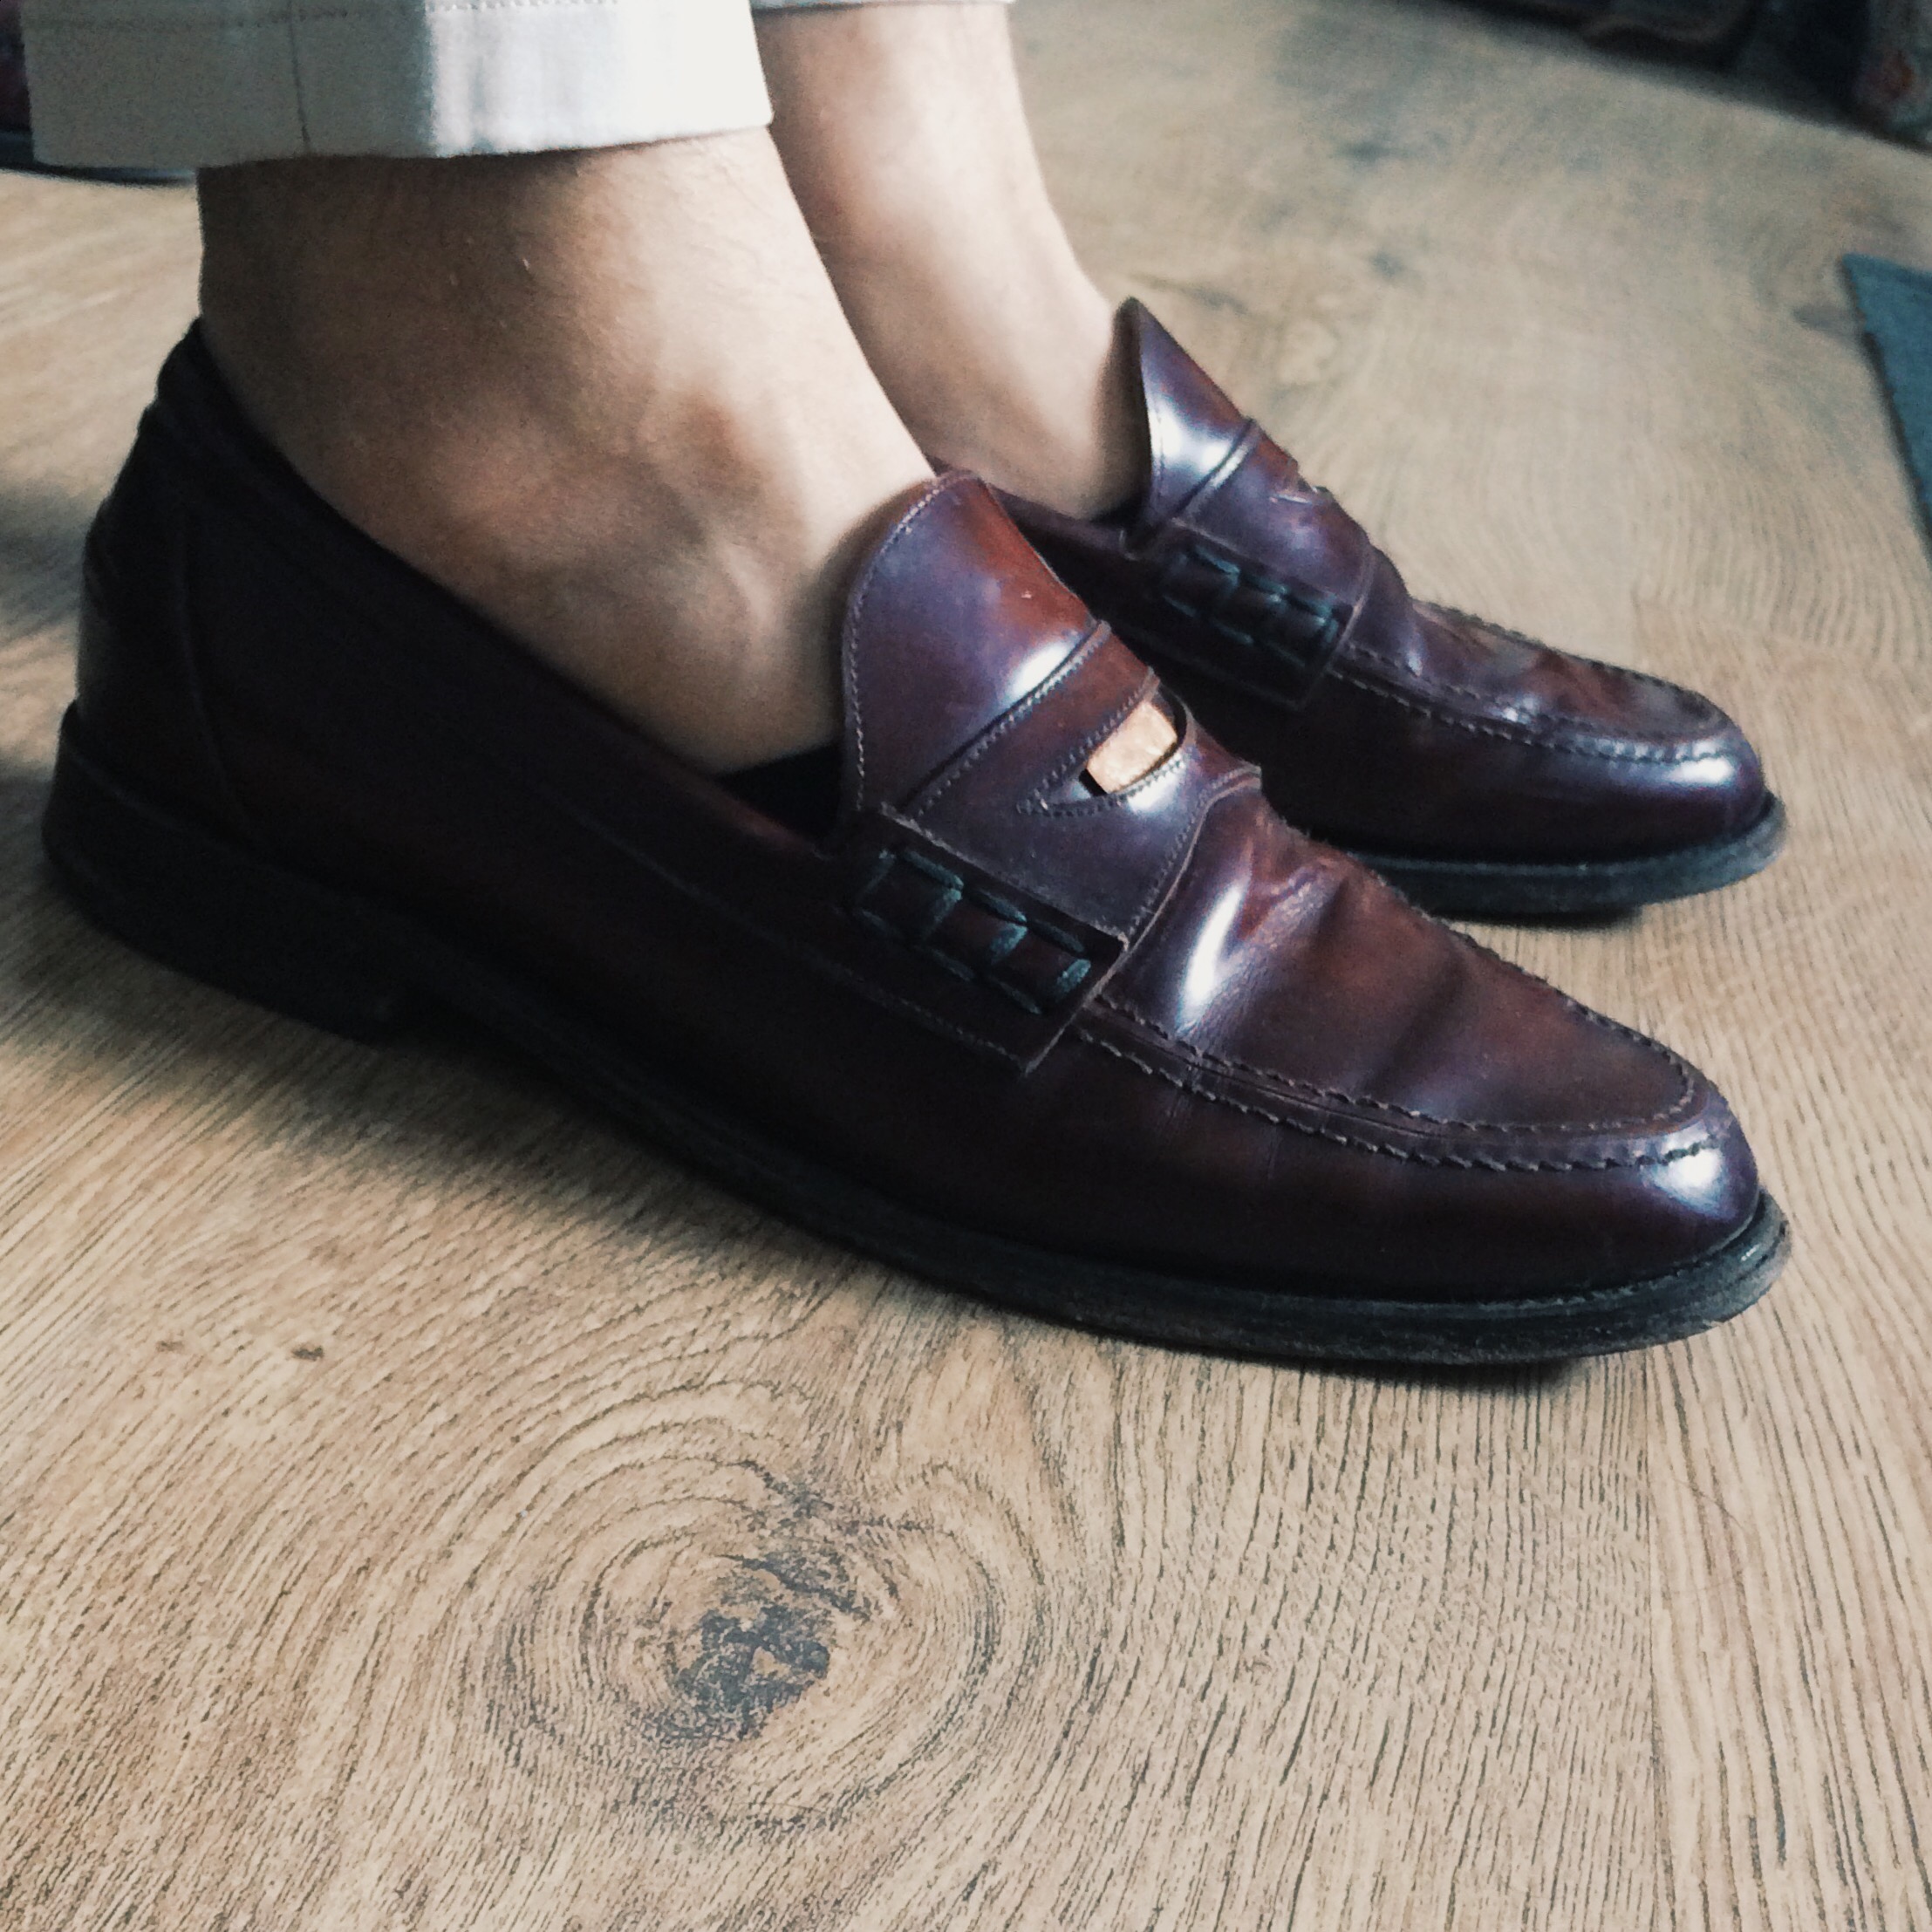 loake penny loafers